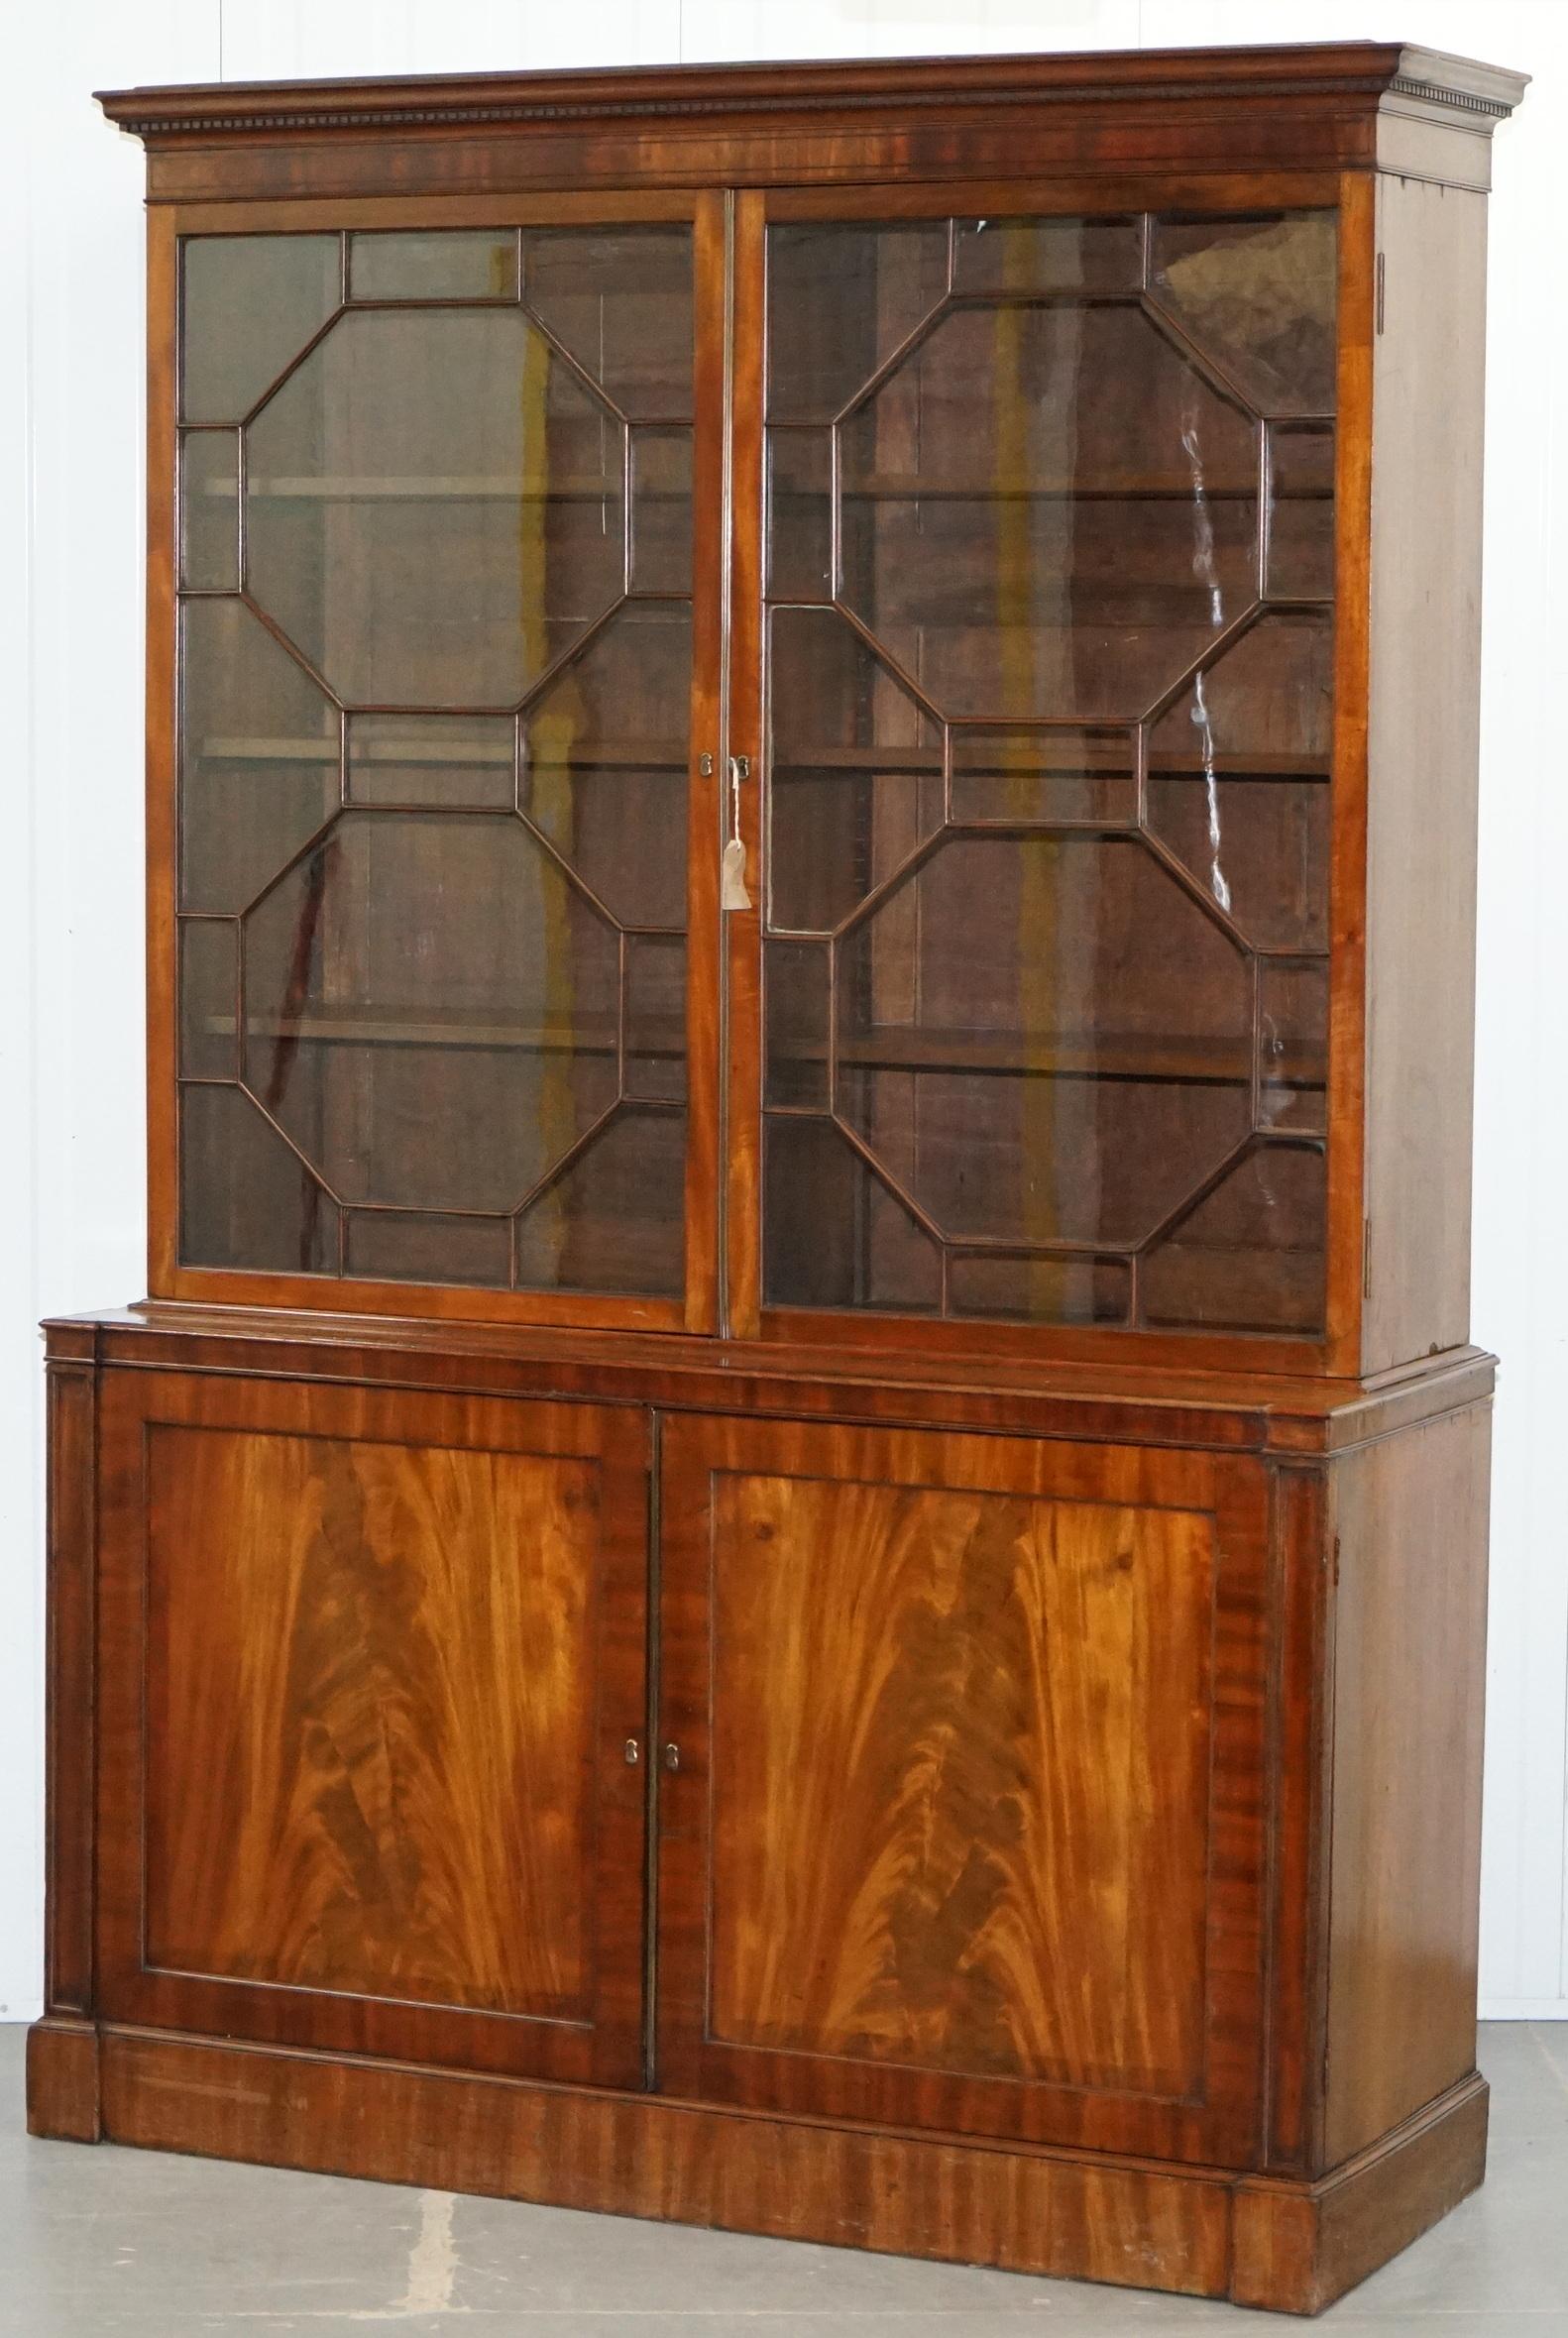 Georgian Very Rare Gillows Astral Glazed Mahogany Bookcase Cabinet Original Paper Labels